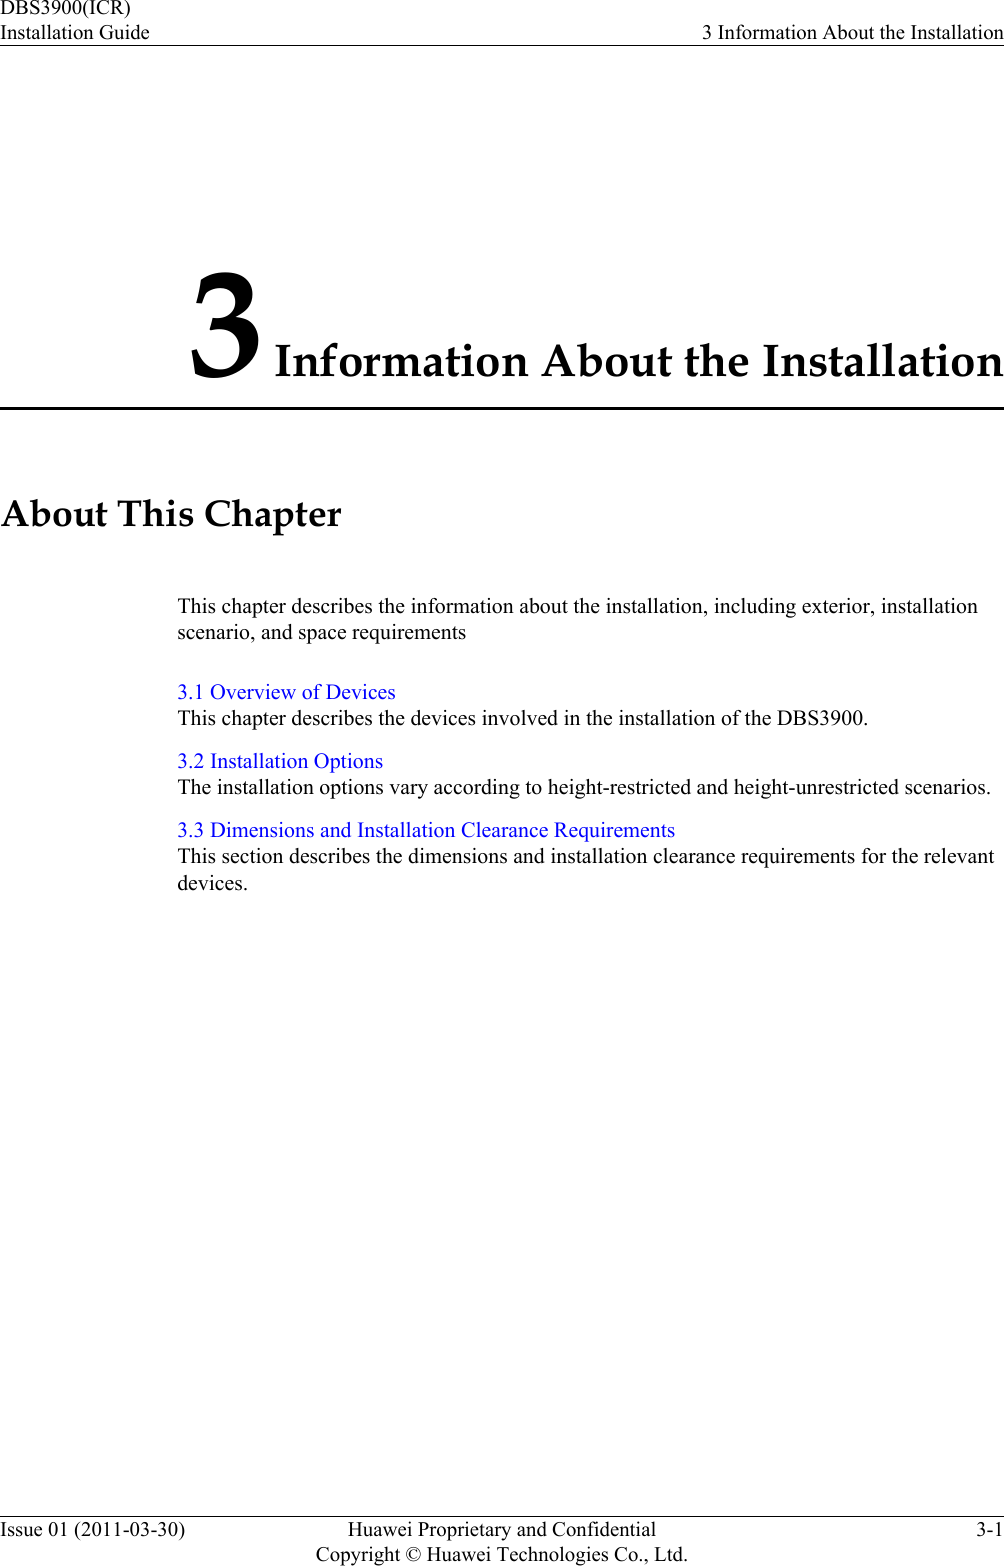 3 Information About the InstallationAbout This ChapterThis chapter describes the information about the installation, including exterior, installationscenario, and space requirements3.1 Overview of DevicesThis chapter describes the devices involved in the installation of the DBS3900.3.2 Installation OptionsThe installation options vary according to height-restricted and height-unrestricted scenarios.3.3 Dimensions and Installation Clearance RequirementsThis section describes the dimensions and installation clearance requirements for the relevantdevices.DBS3900(ICR)Installation Guide 3 Information About the InstallationIssue 01 (2011-03-30) Huawei Proprietary and ConfidentialCopyright © Huawei Technologies Co., Ltd.3-1